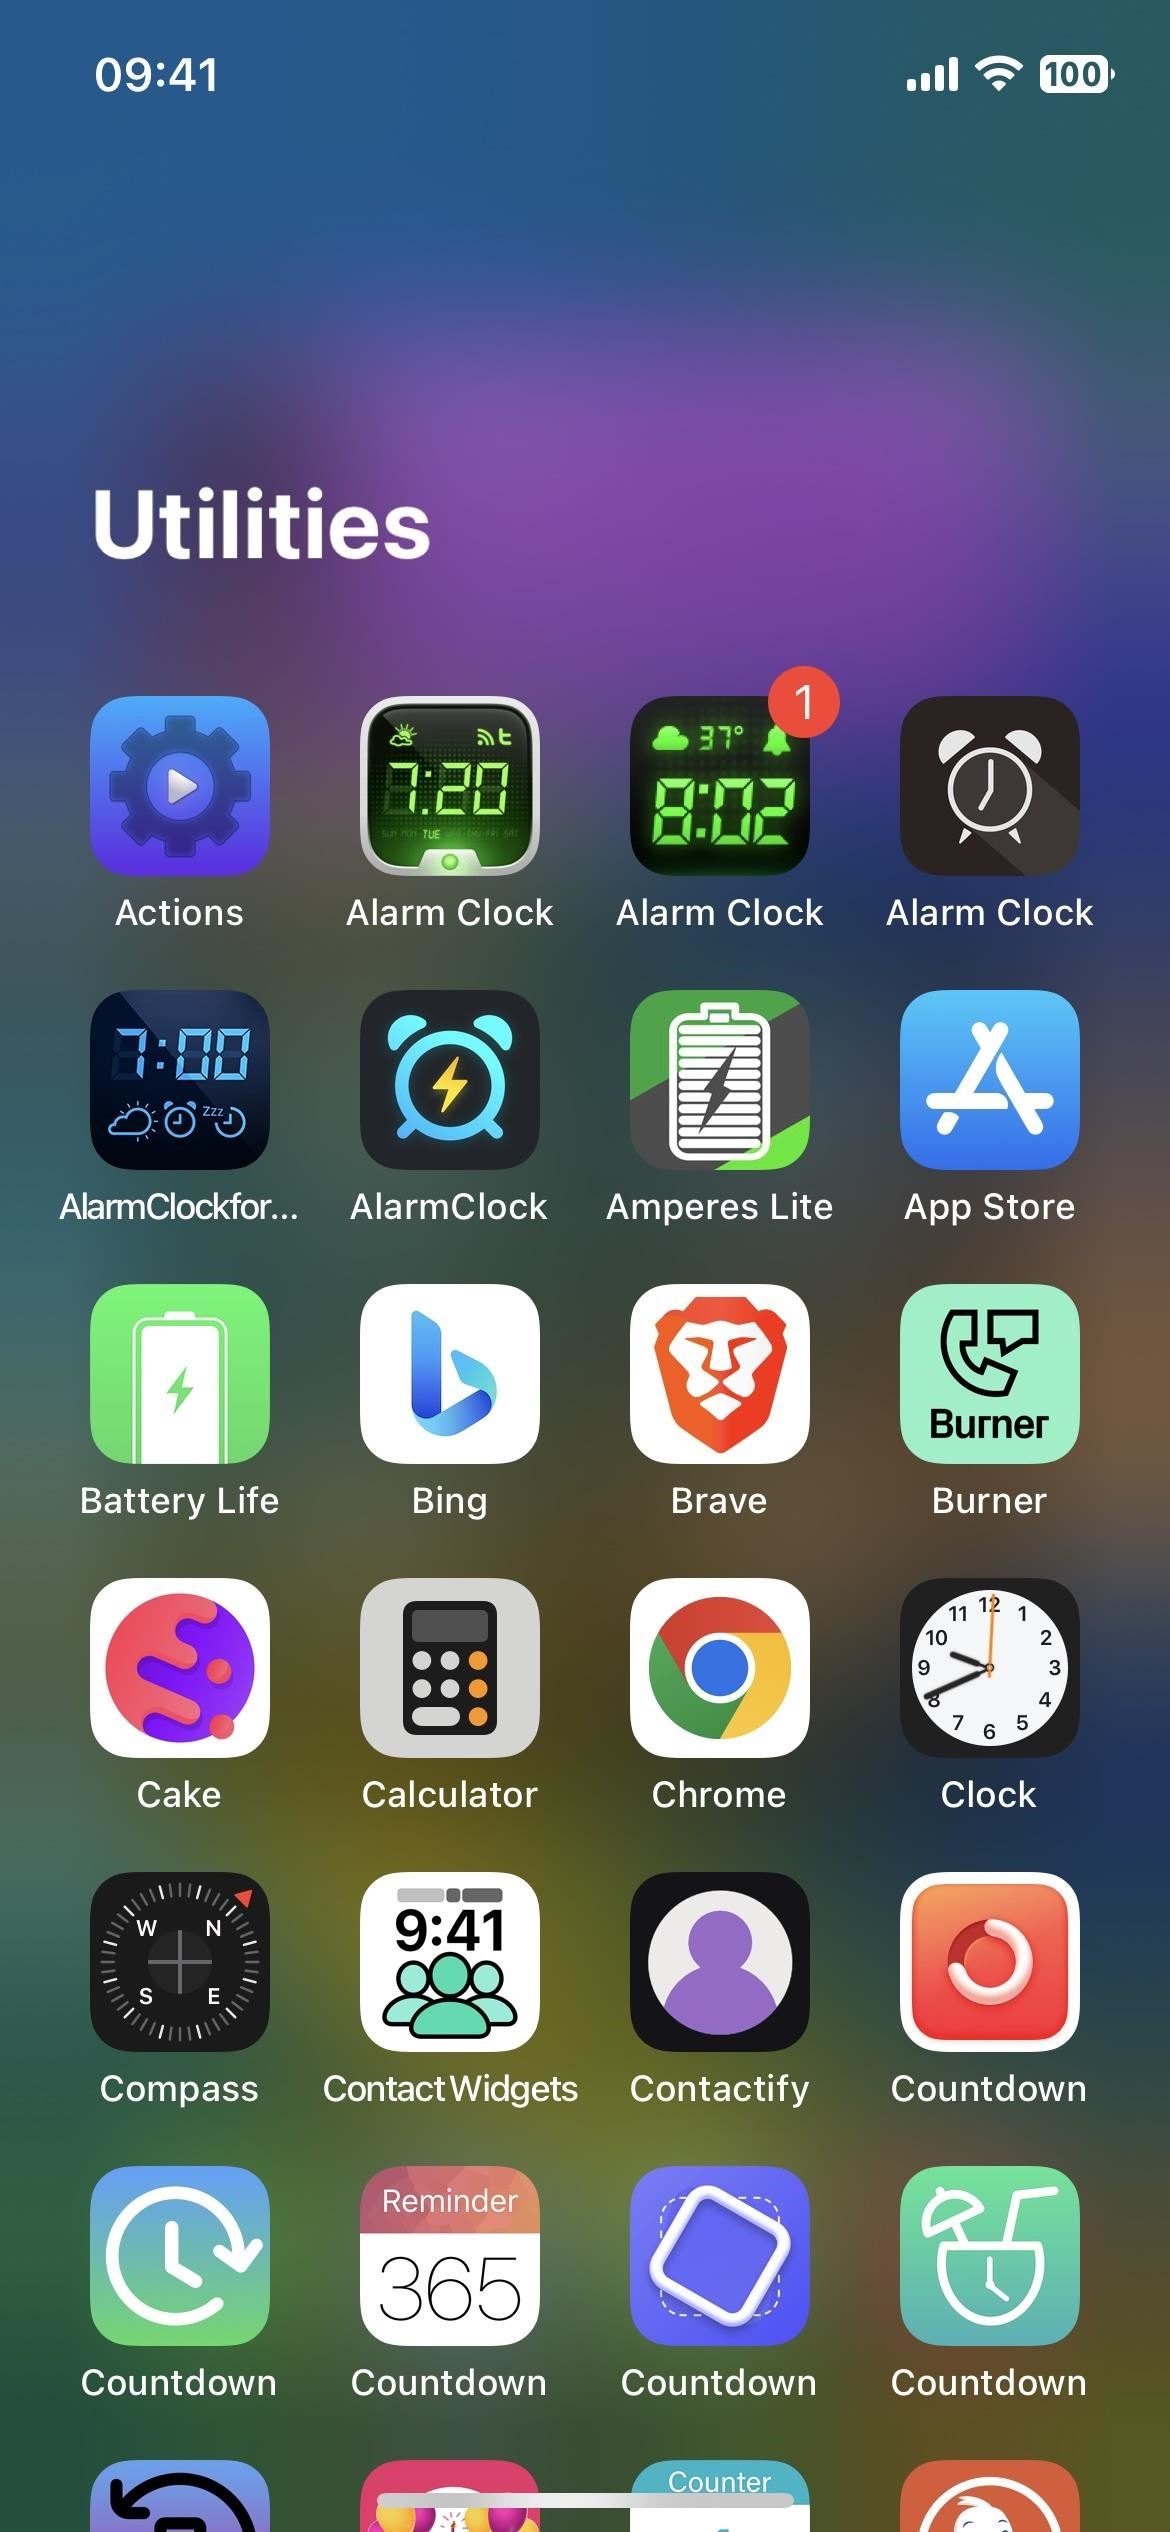 How to Open Your iPhone's App Library Faster from Your Home Screen or Anywhere Else